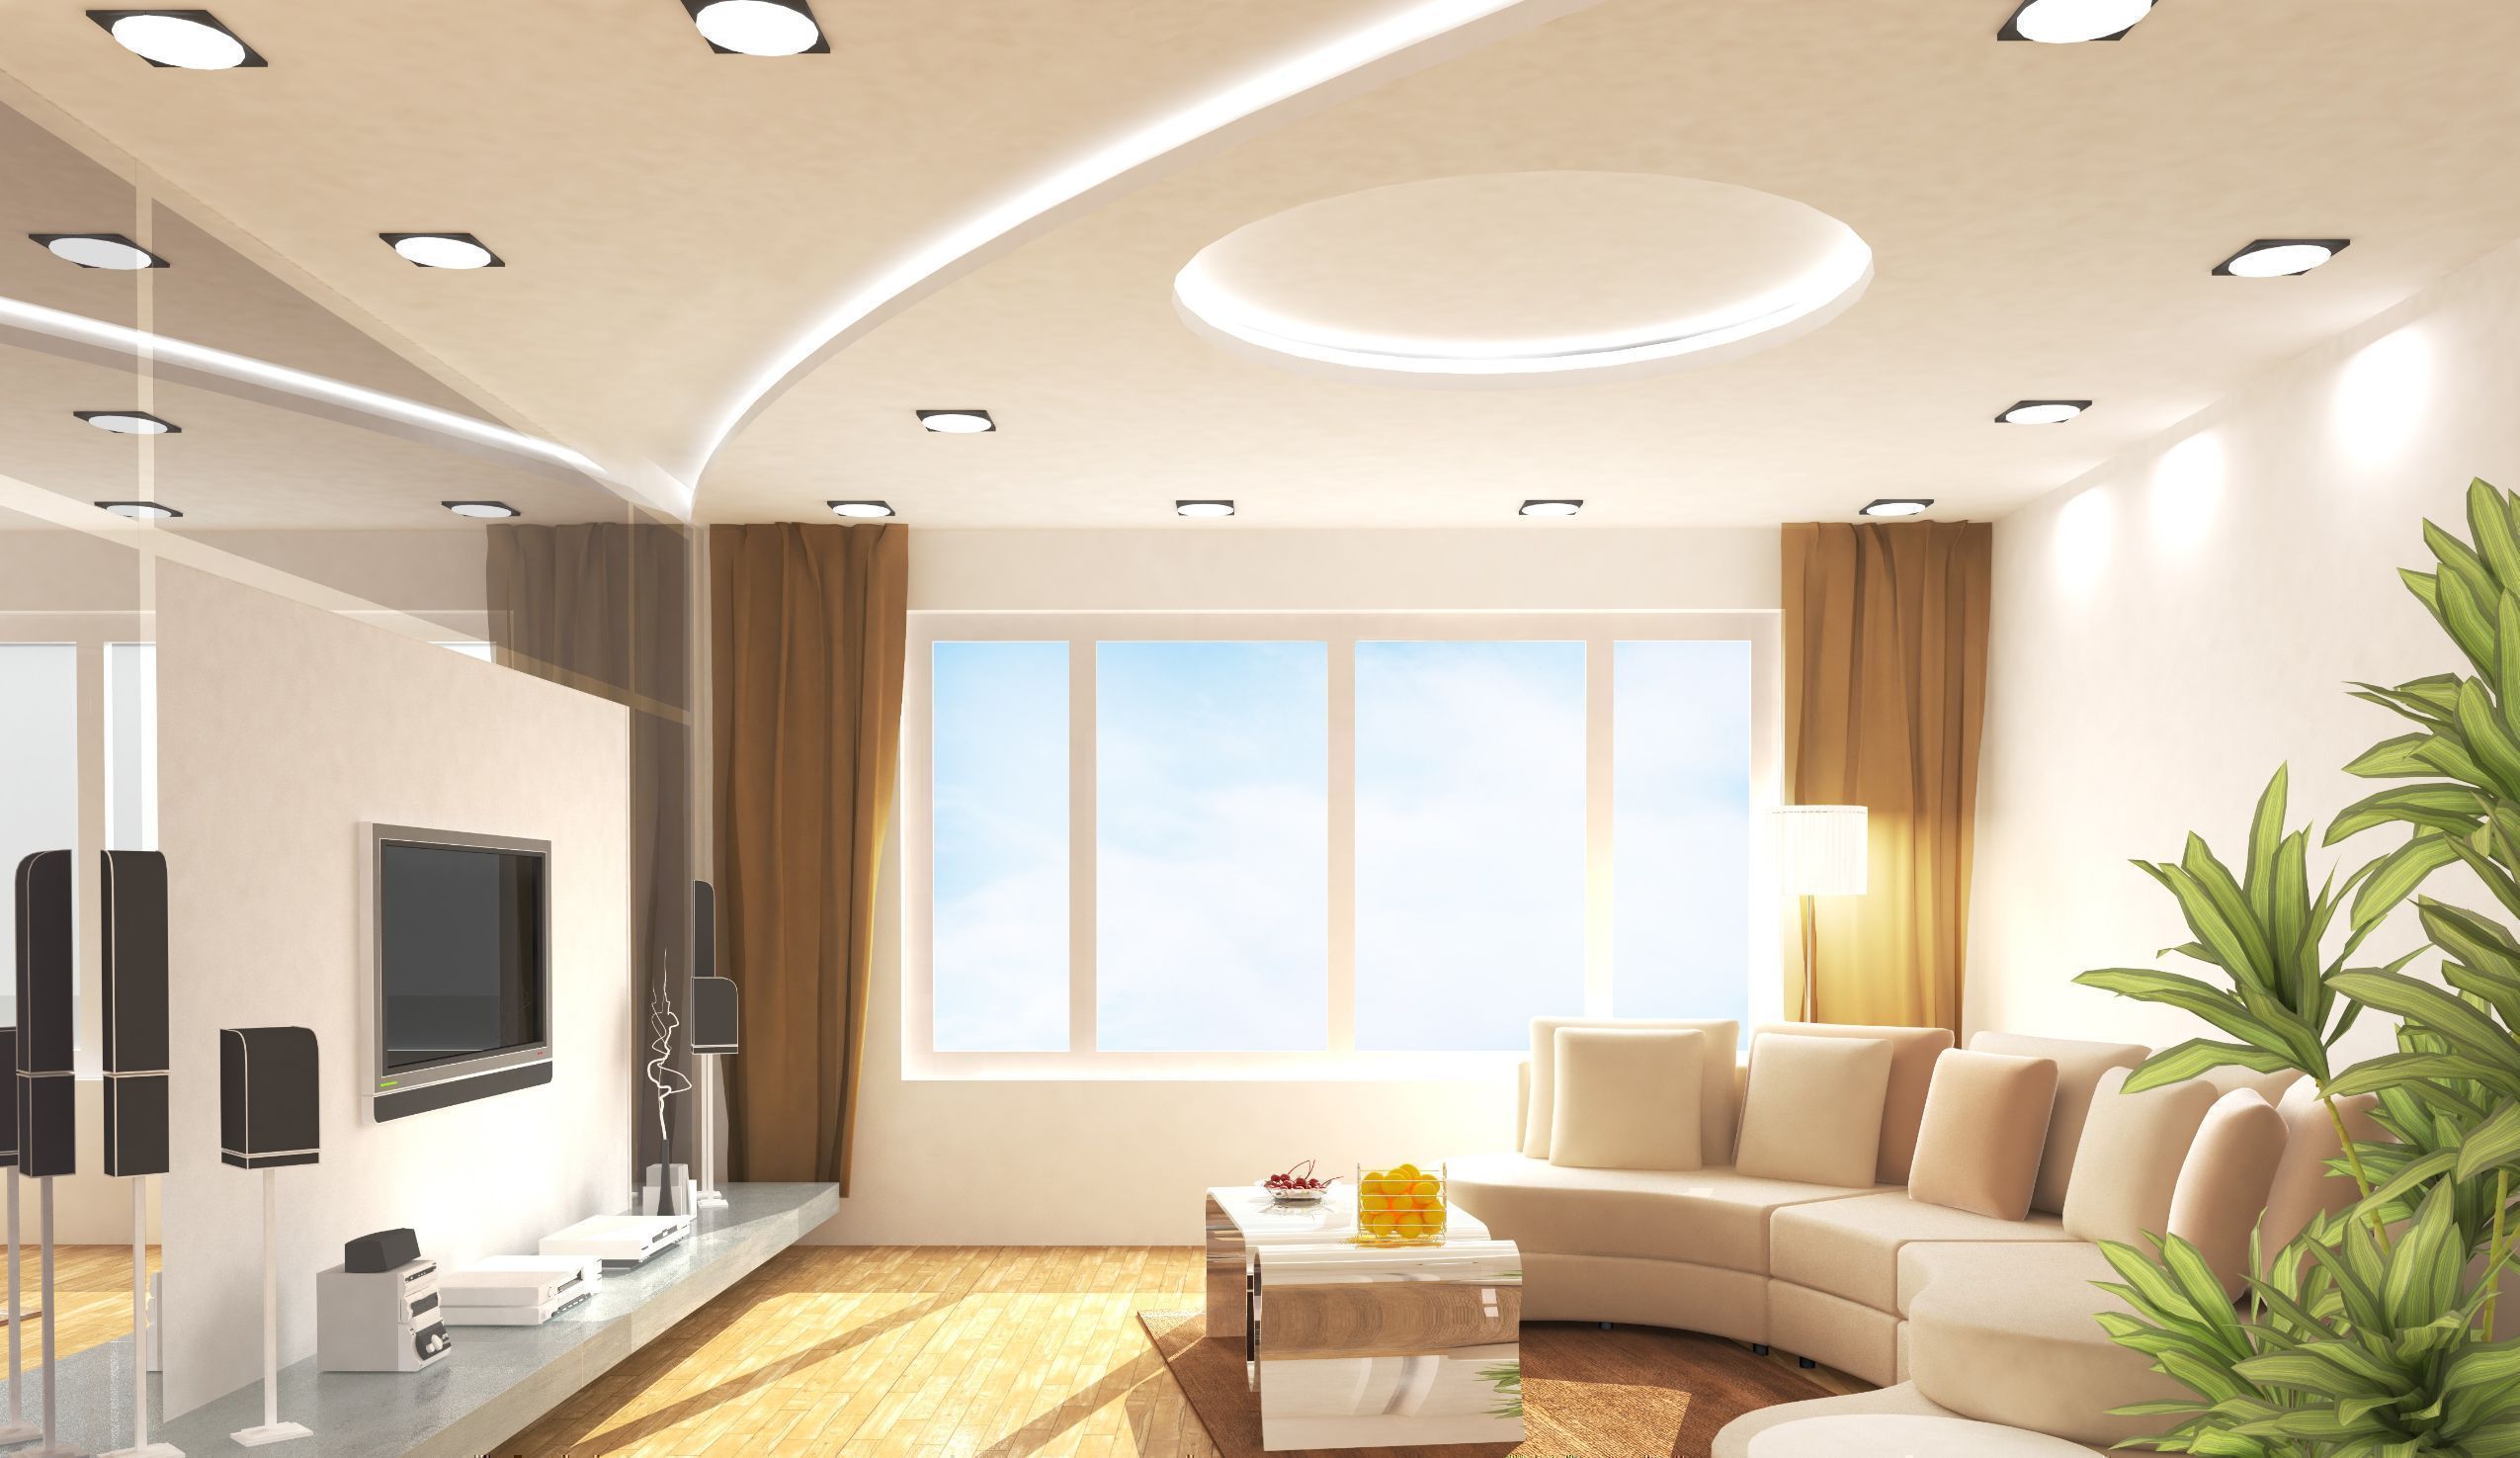 19 False Ceiling Design for Hall Latest With Images